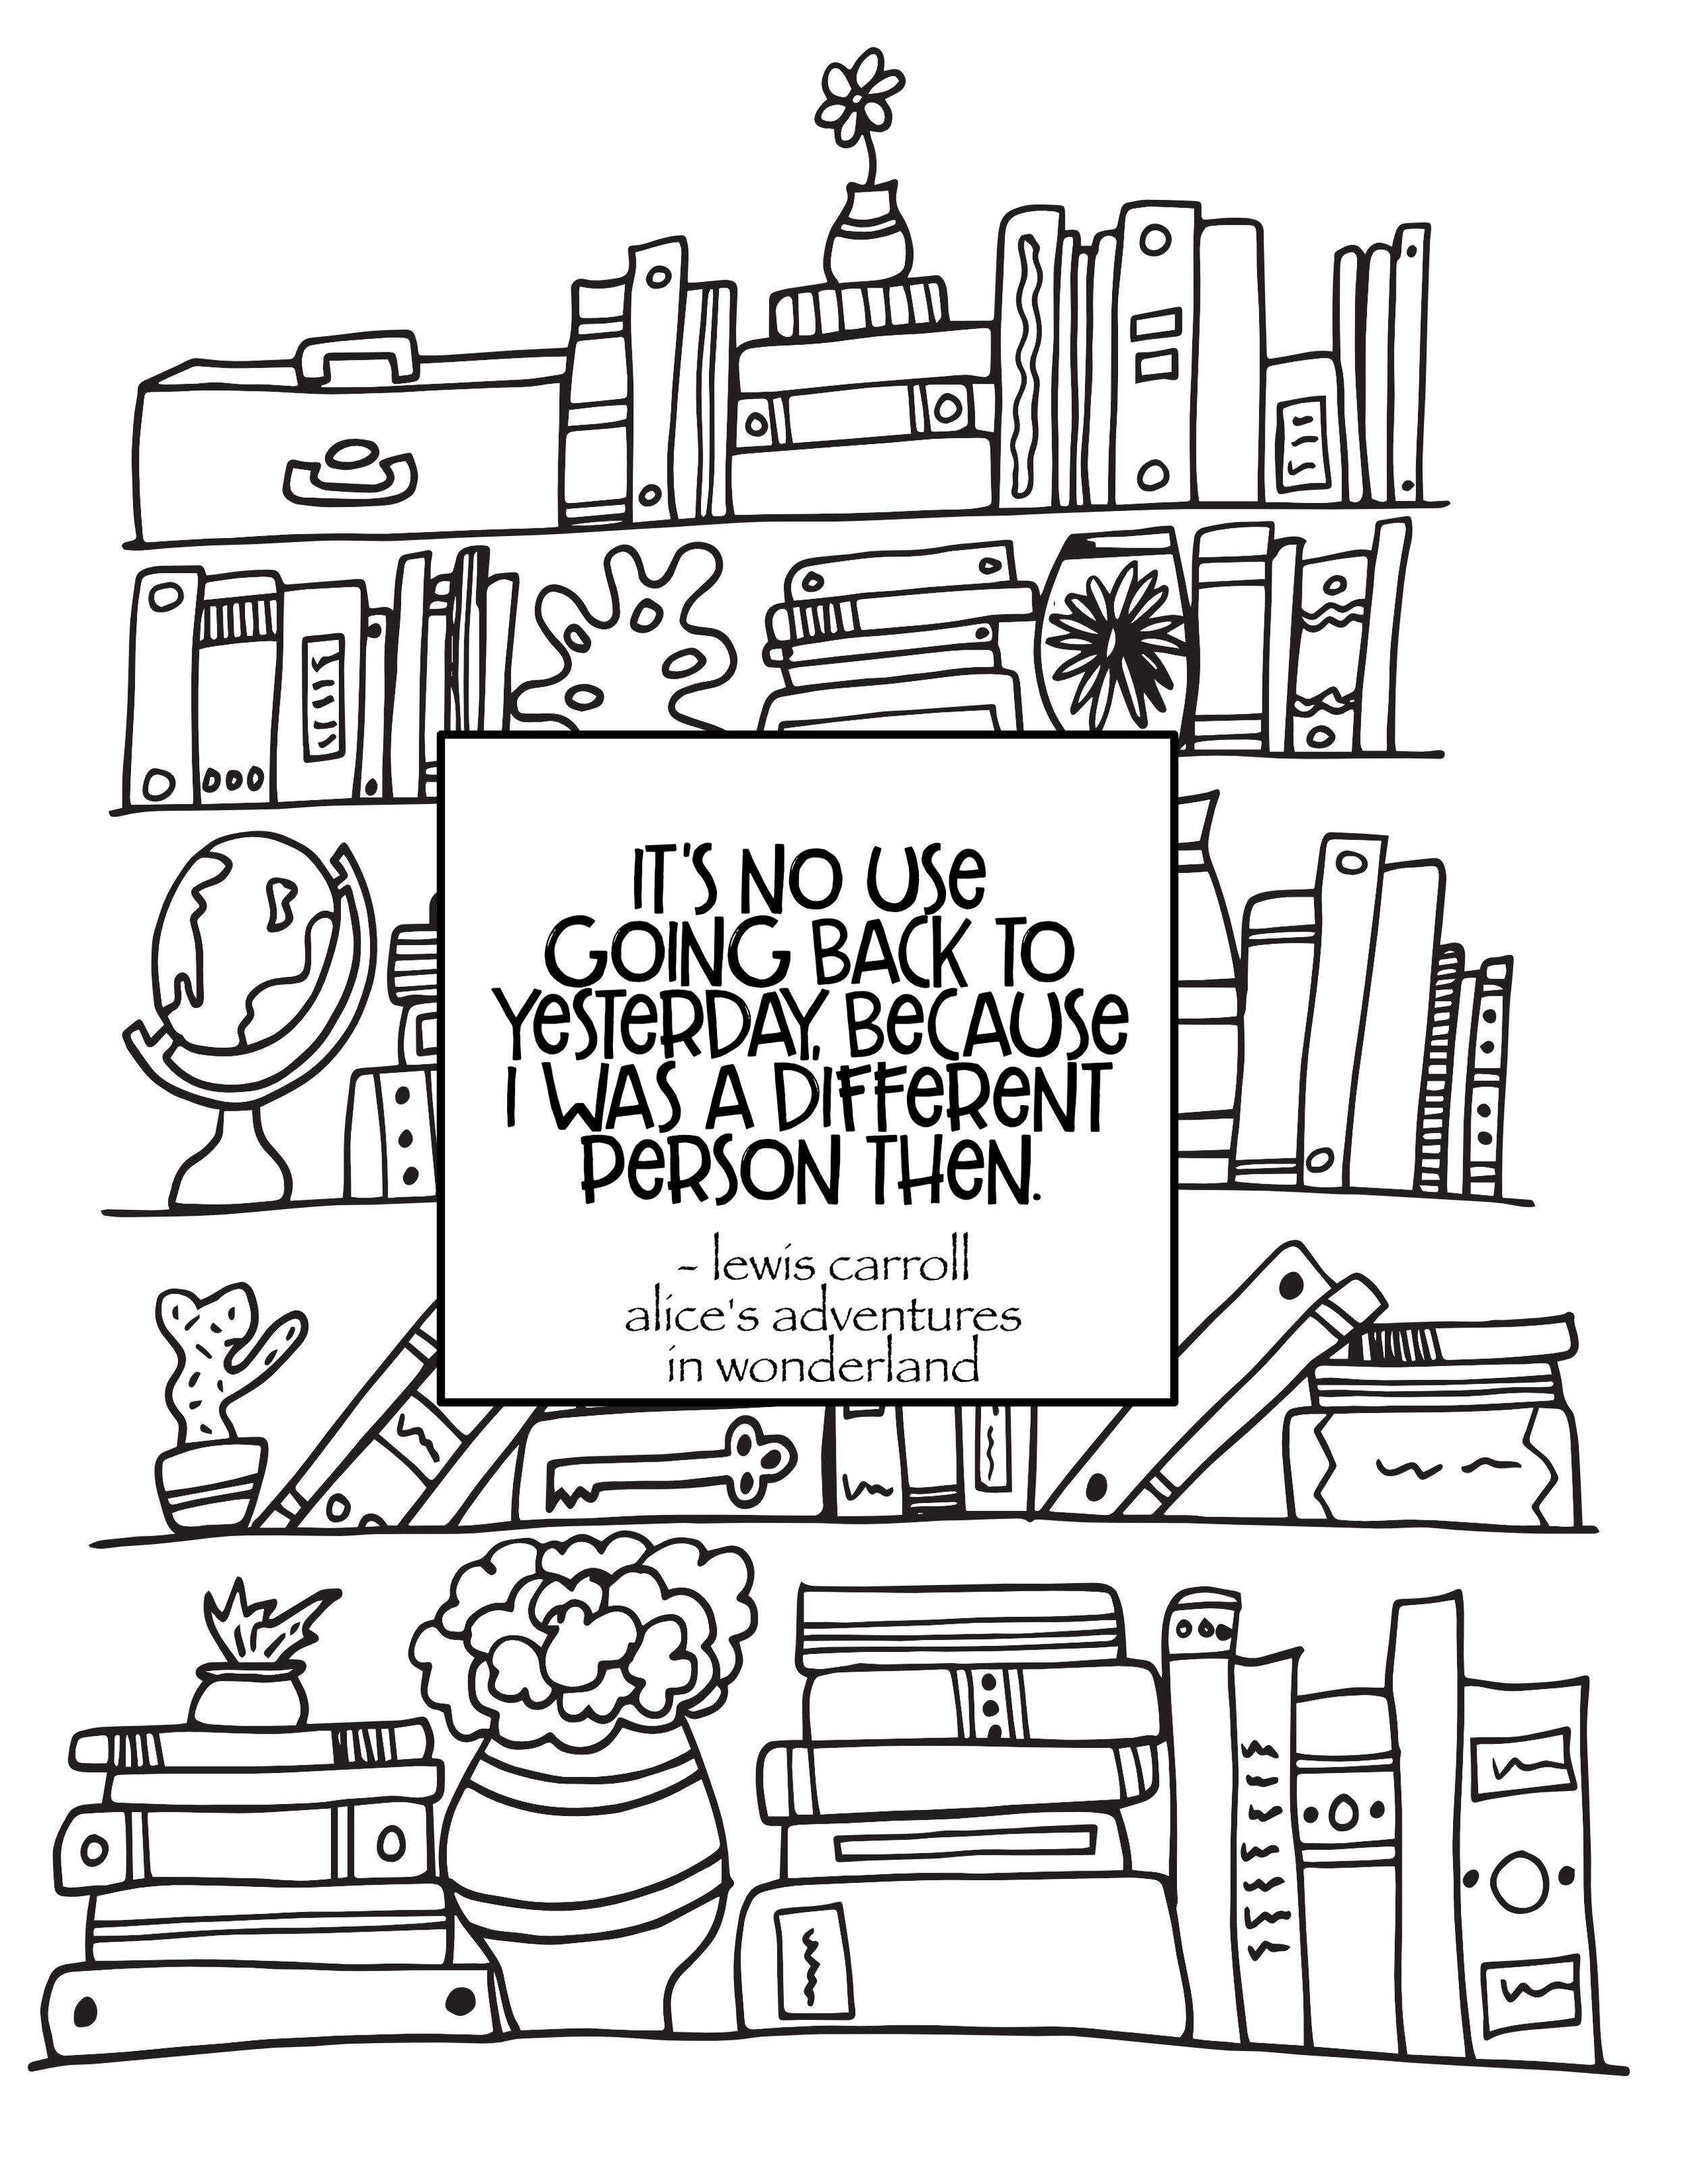 Free printable coloring sheet. Alice in Wonderland quote.